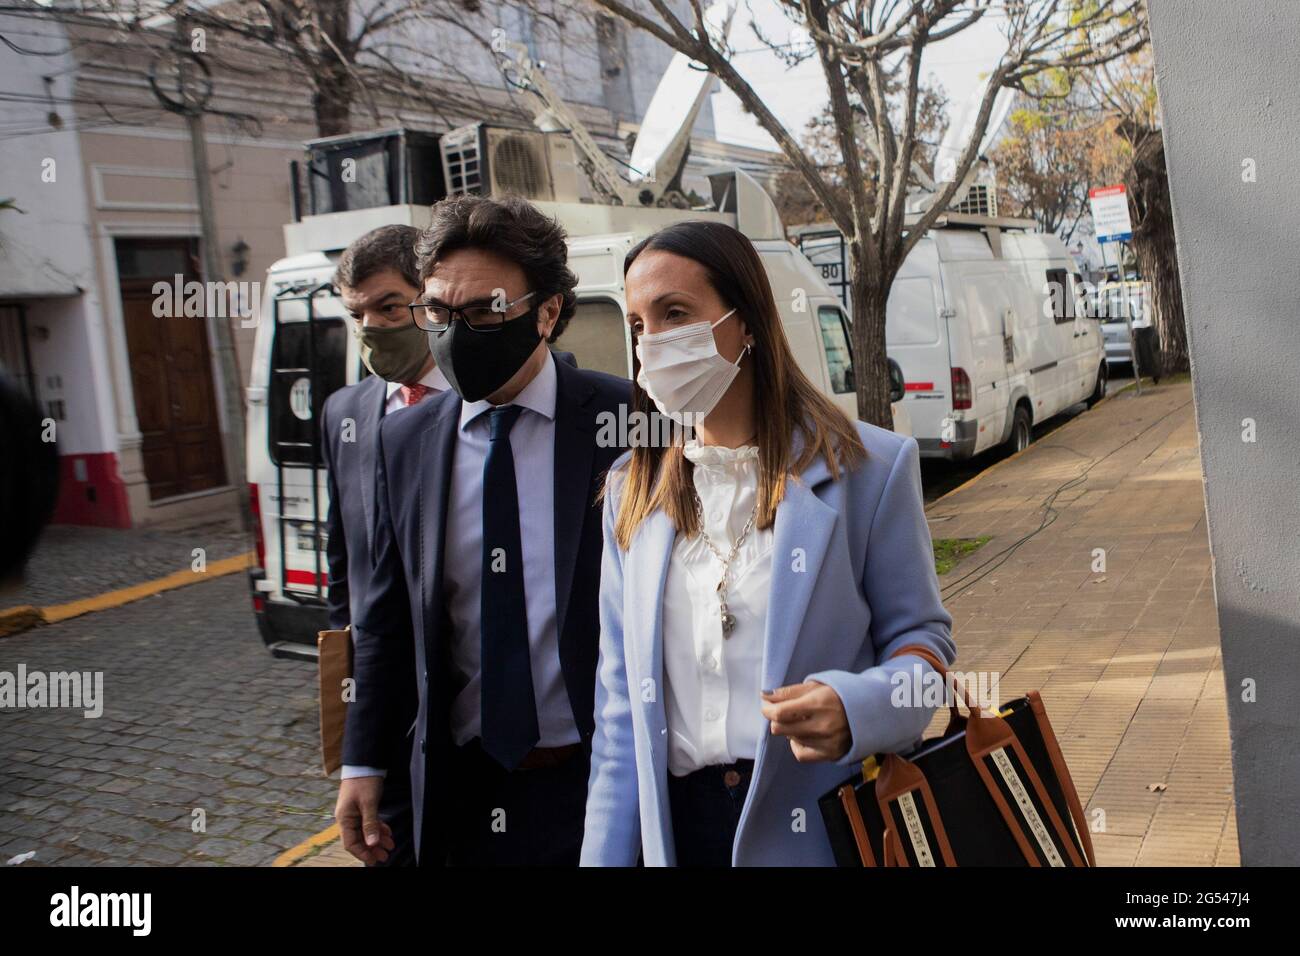 Buenos Aires, Argentina. 25th June, 2021. Psychiatrist Agustina Cosachov (r) and her lawyer Vadim Mishanchuk (l) arrive at the prosecutor's office where they are to testify as part of the investigation into Maradona's death. Prosecutors in San Isidro, north of Buenos Aires, are questioning the Argentine soccer legend's doctors and nurses. Investigators are accusing Maradona's personal physician Luque, psychiatrist Cosachov and several nurses of manslaughter. Credit: Matias Baglietto/dpa/Alamy Live News Stock Photo